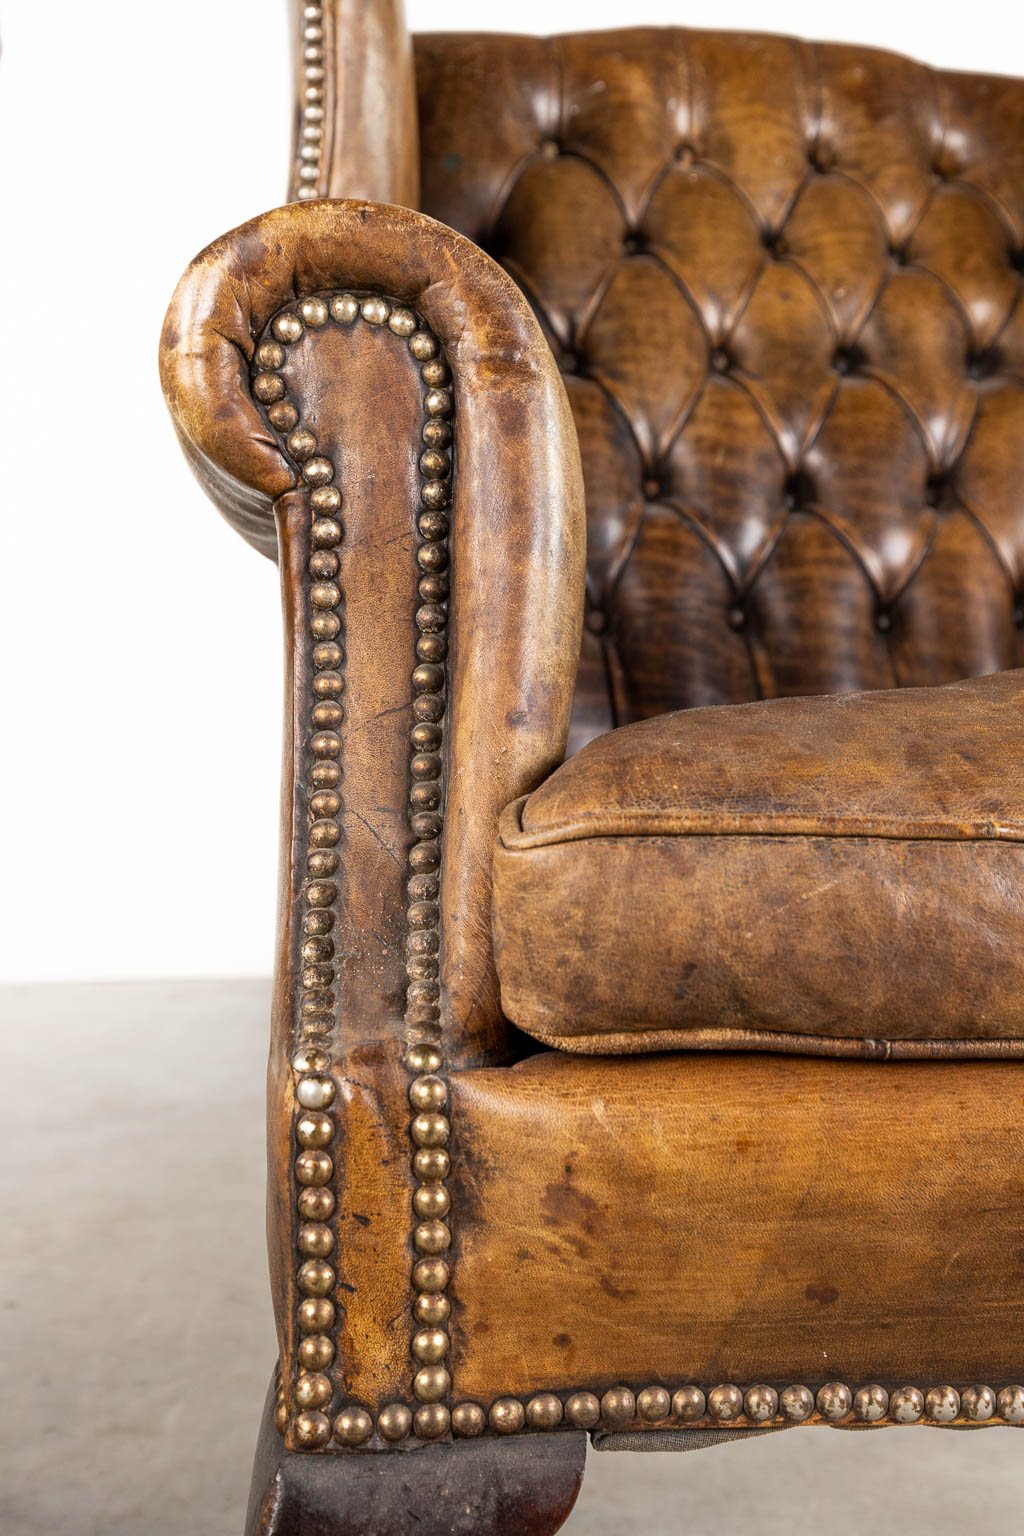 A pair of armchairs, Chesterfield style, leather and wood. (D:85 x W:78 x H:107 cm)